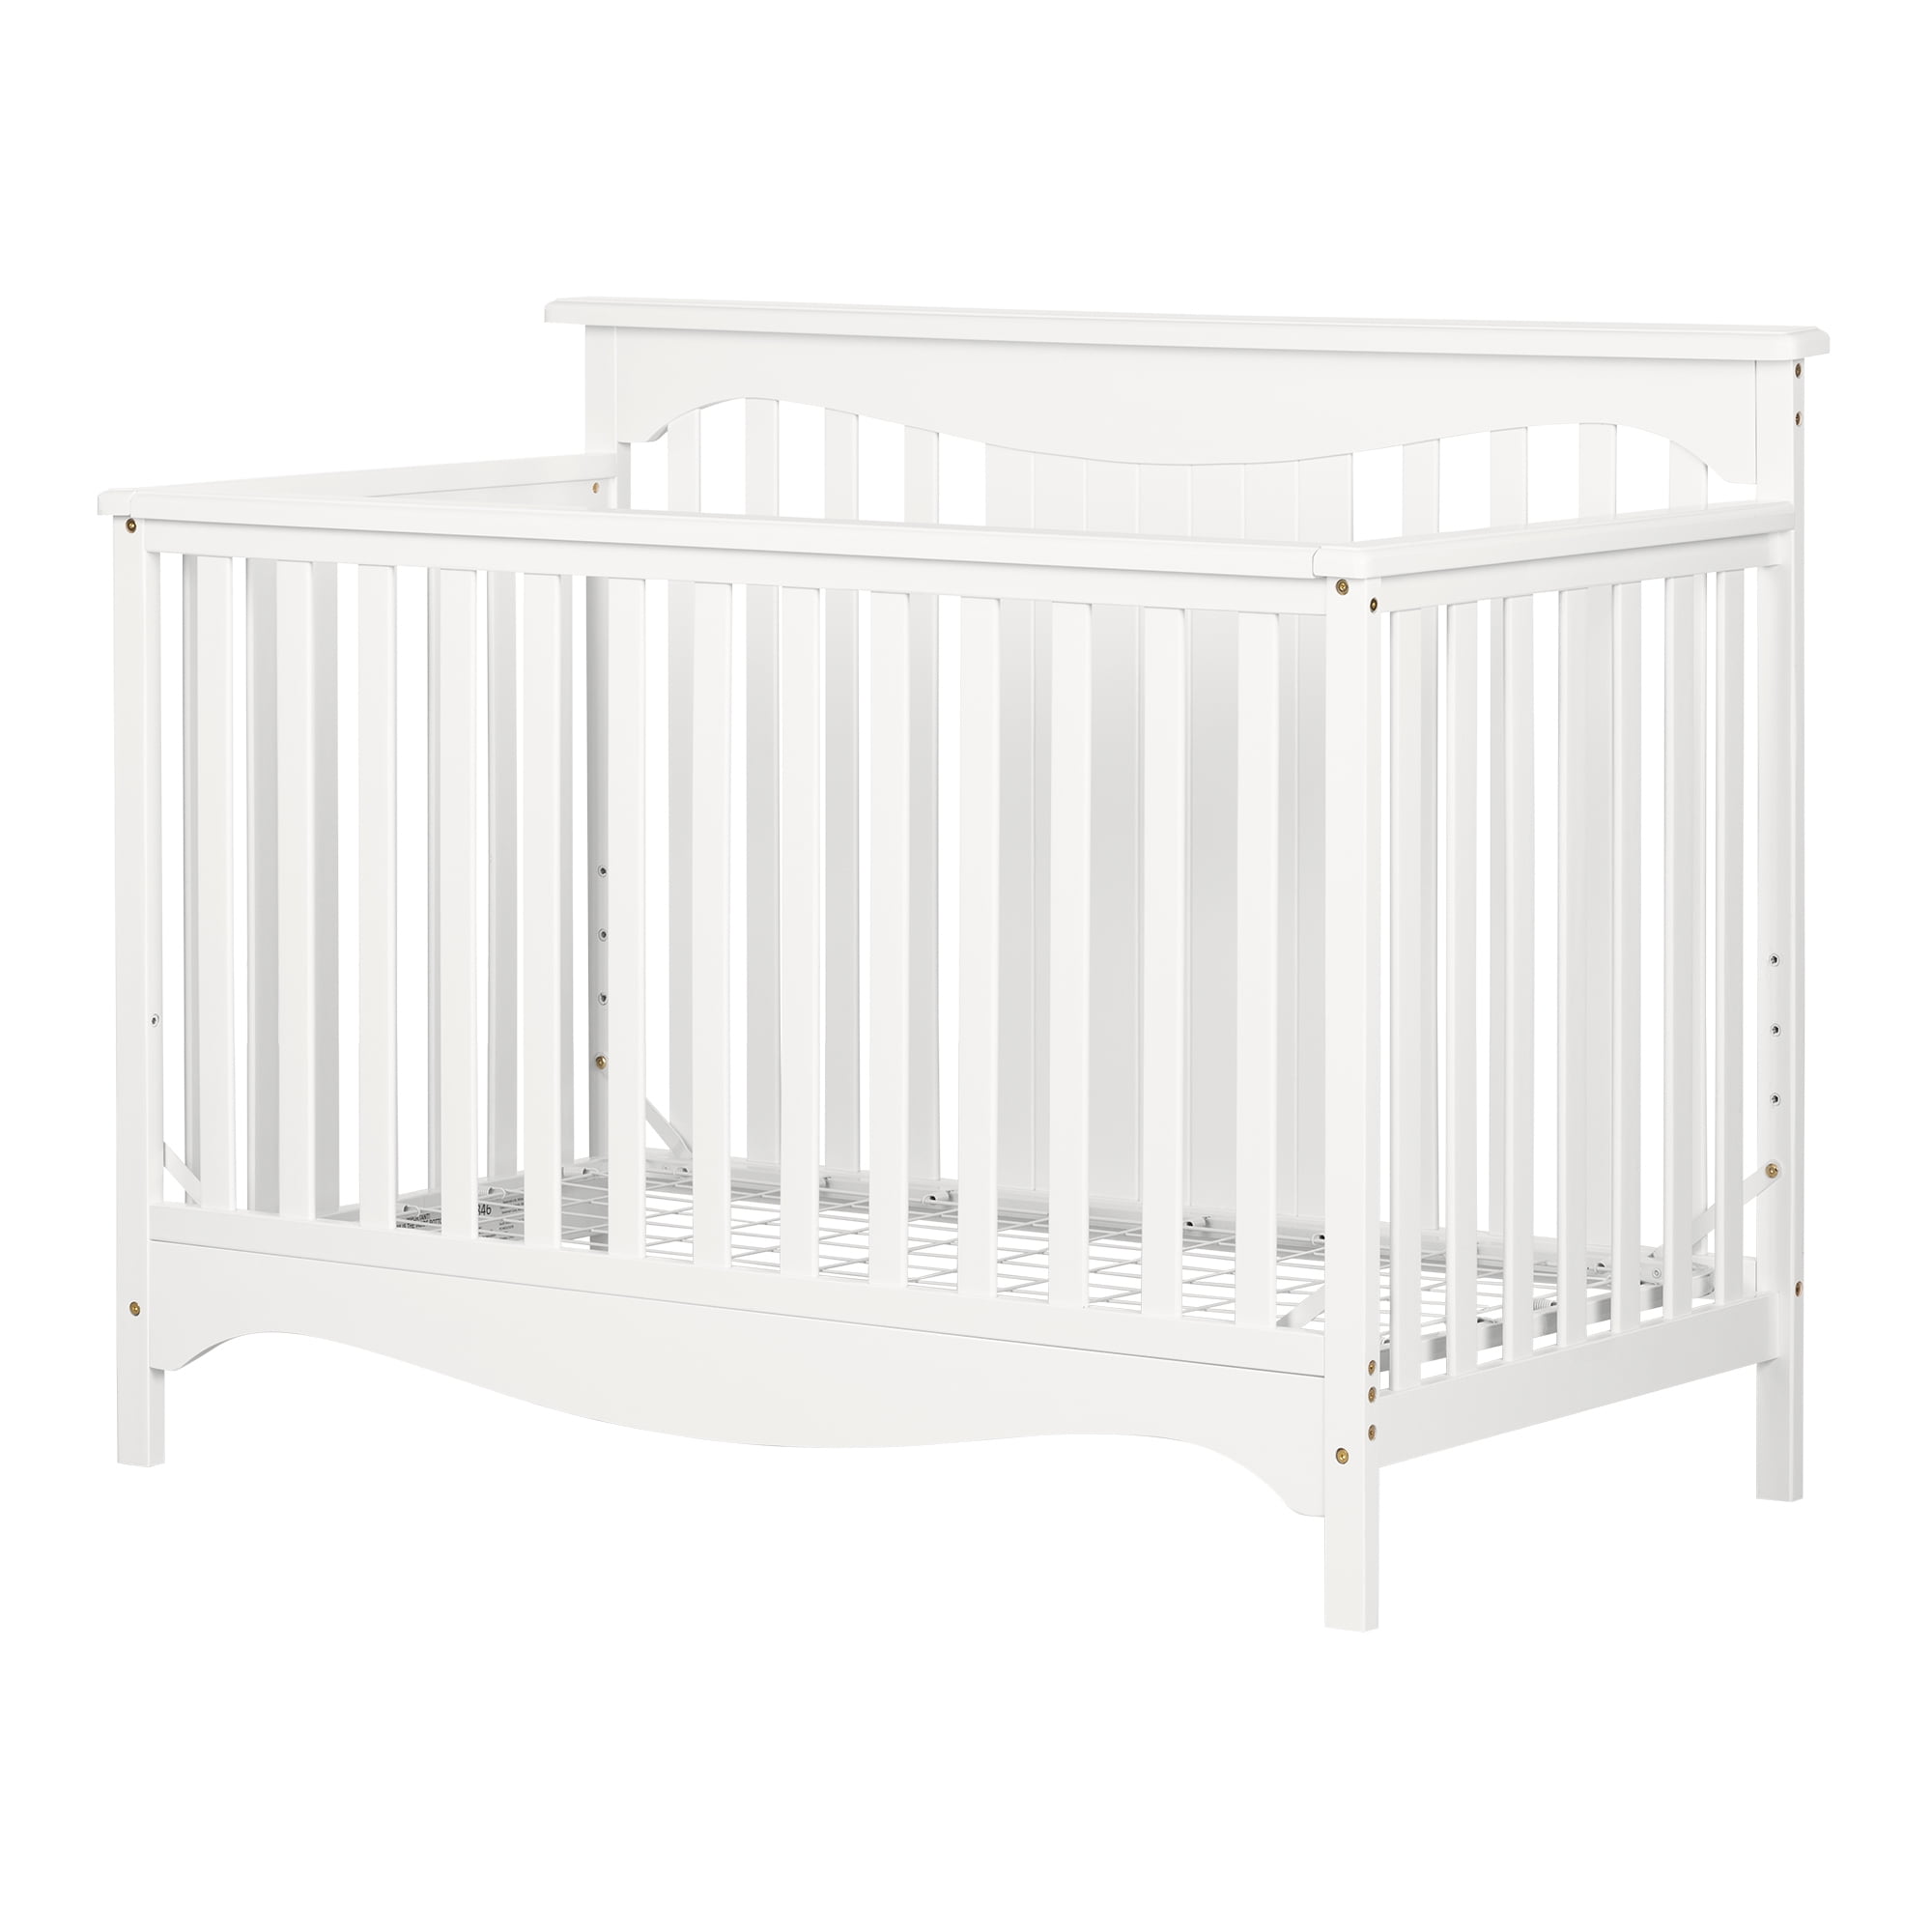 baby cribs for sale walmart